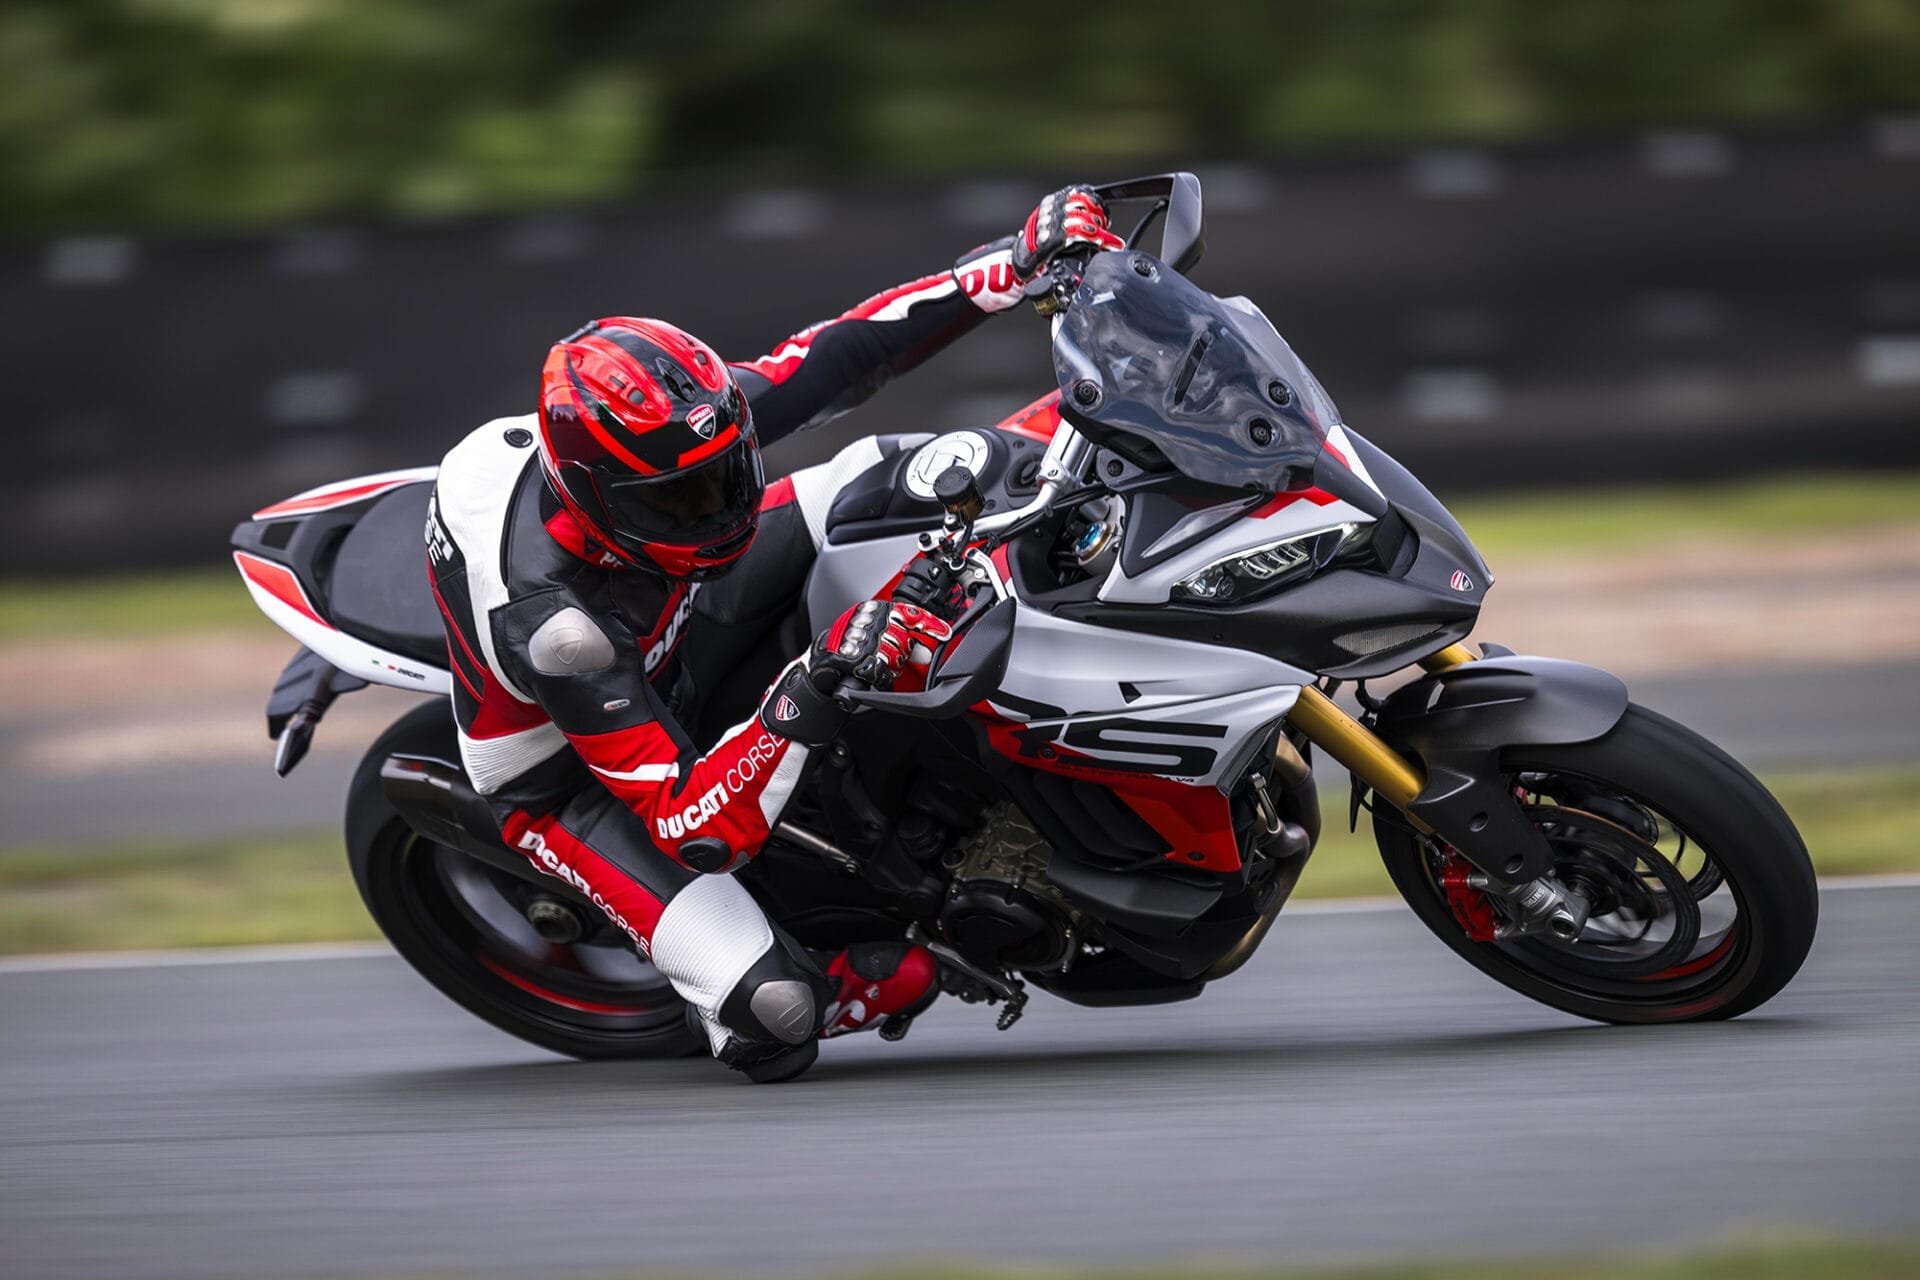 Multistrada V4 RS: Ducati’s new technology and design jewel to mark its anniversary